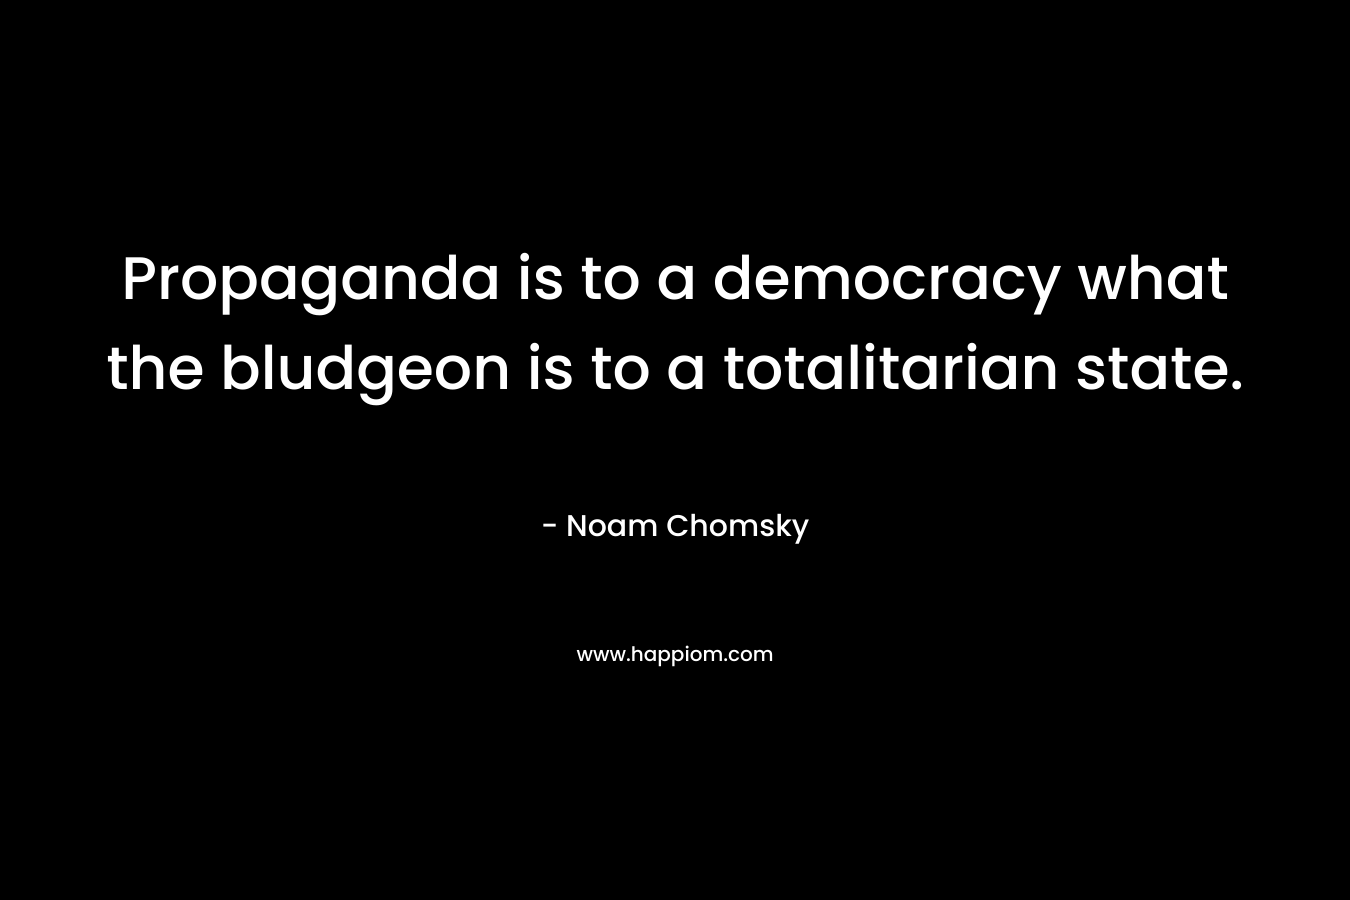 Propaganda is to a democracy what the bludgeon is to a totalitarian state. – Noam Chomsky